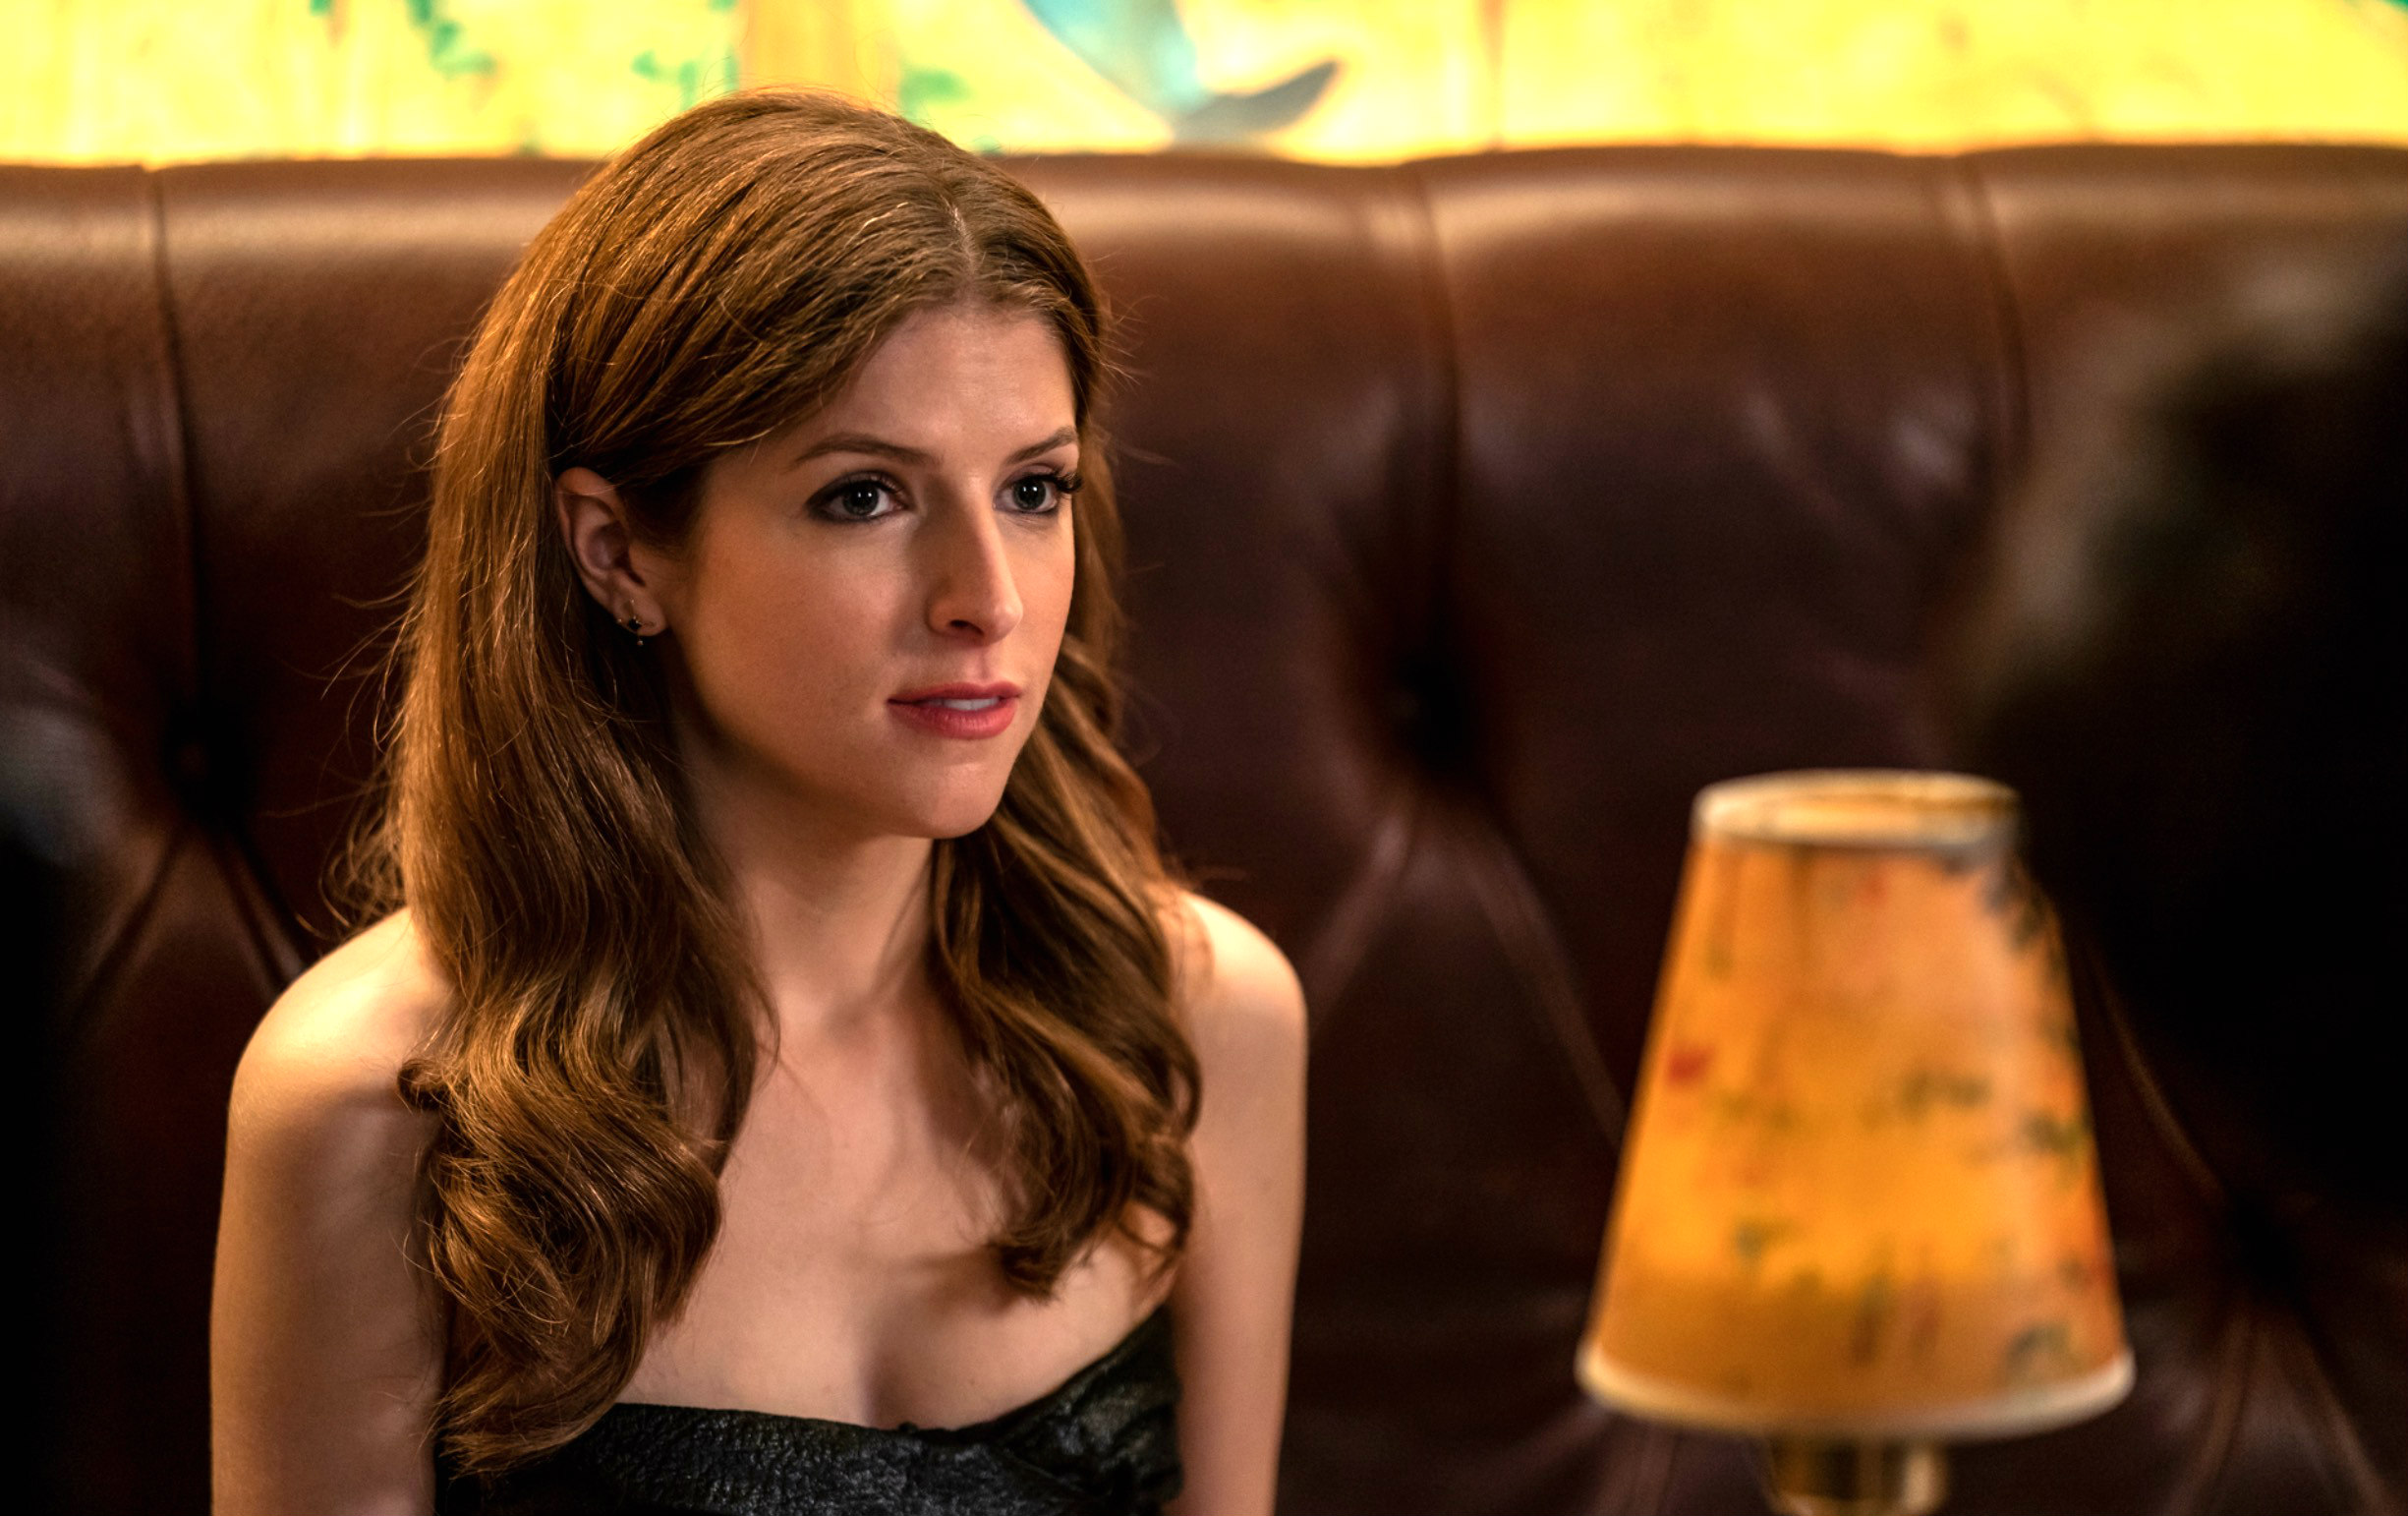 Has Anna Kendrick Ever Been Nude